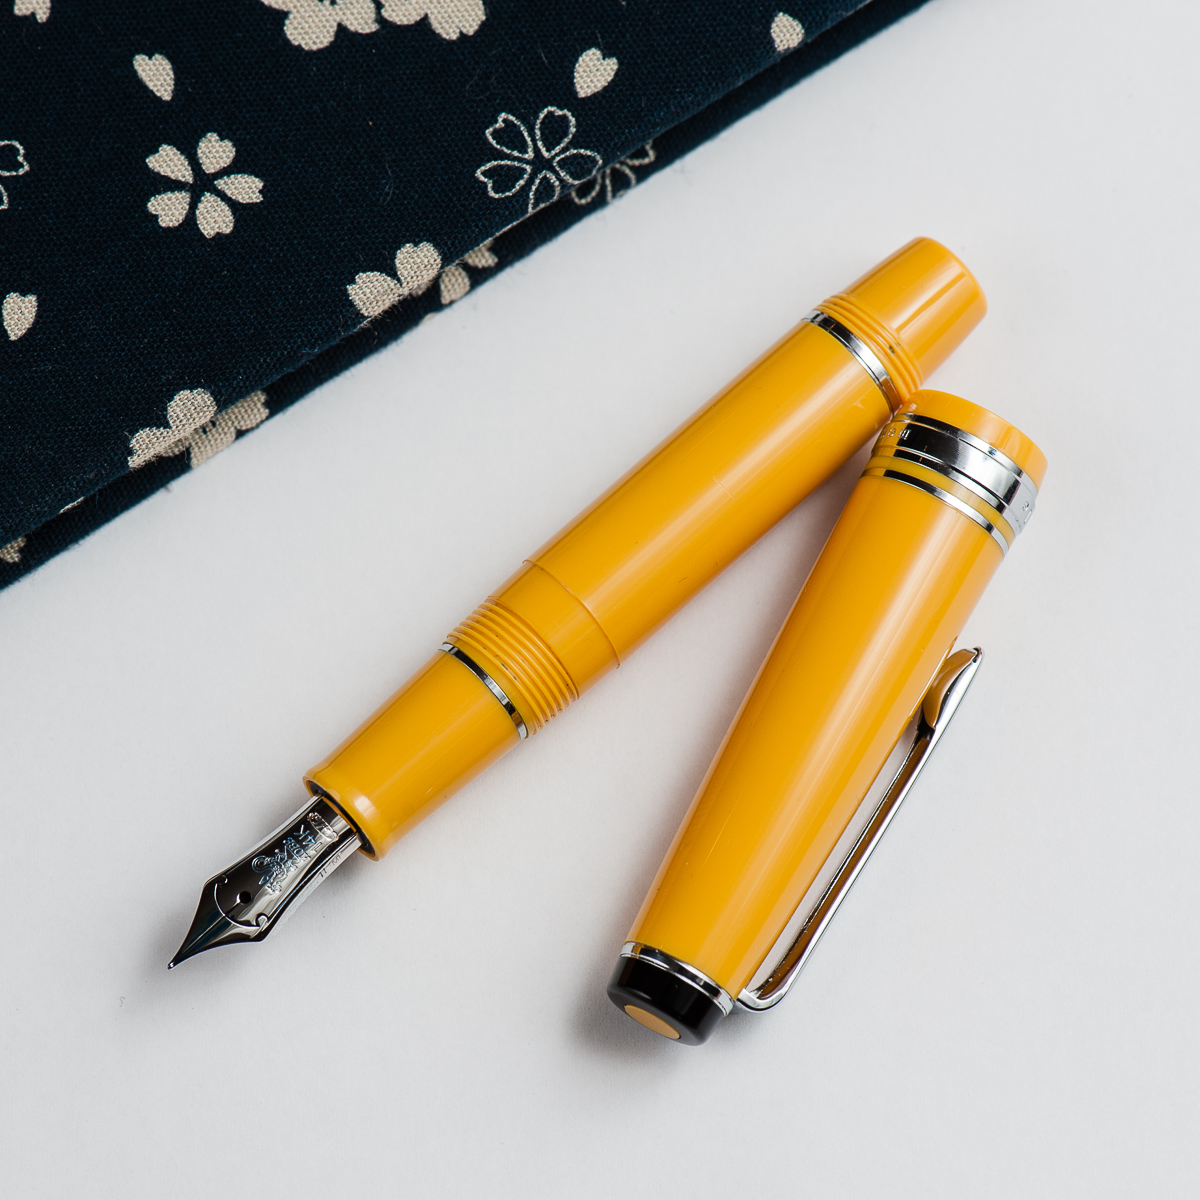 Think Fountain Pen Bumble Bee New.